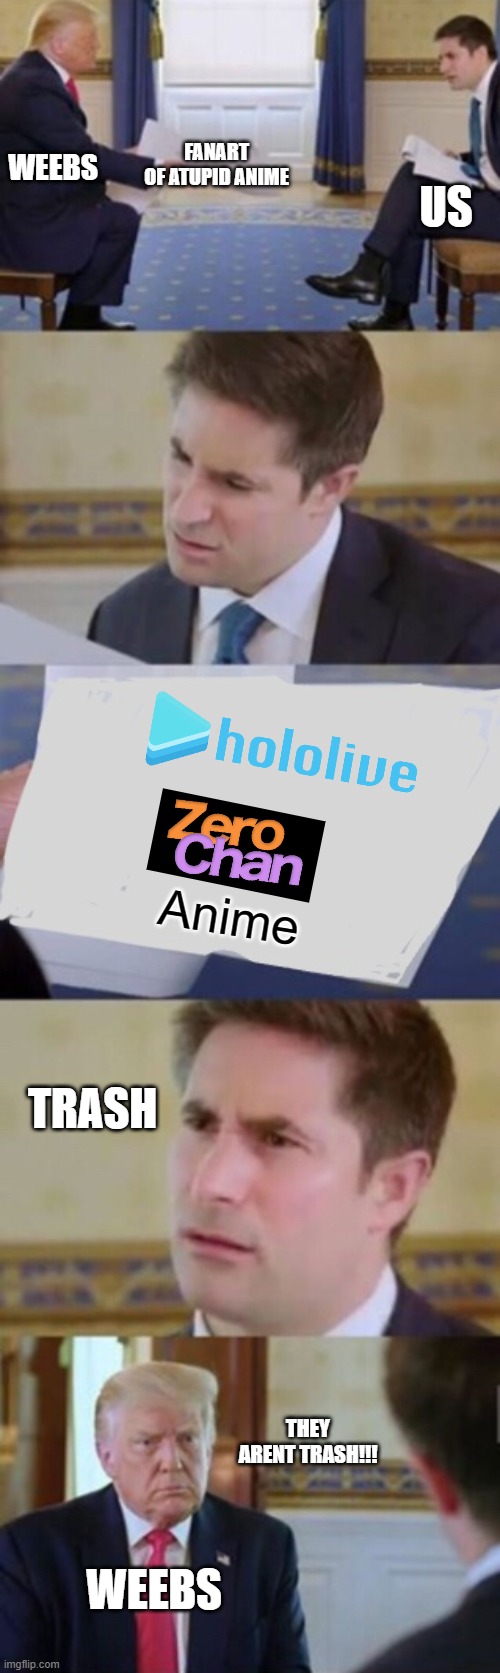 No anime, Hololive and zerochan | FANART
OF ATUPID ANIME; WEEBS; US; Anime; TRASH; THEY ARENT TRASH!!! WEEBS | image tagged in trump interview,NoAnimePolice | made w/ Imgflip meme maker